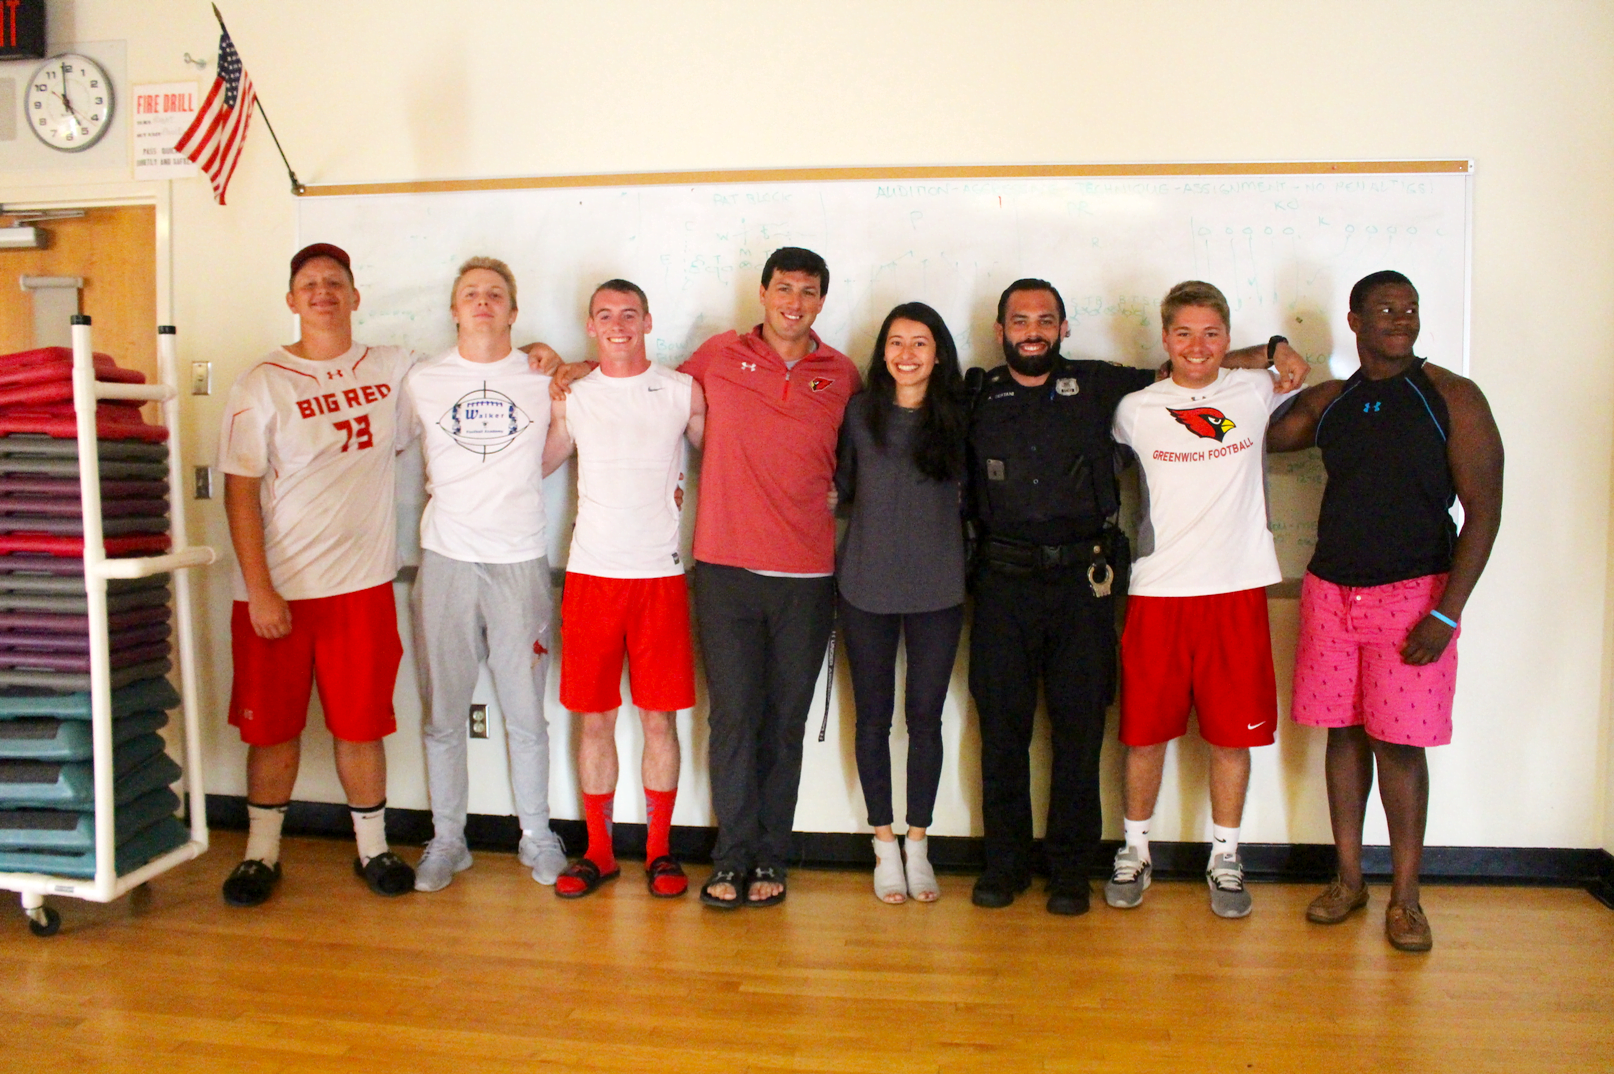 GHS football head coach John Marinelli, YWCA's Yajaira Gonzalez, and Greenwich Police Dept officer Alex Testani with the Greenwich High School football team captains. Aug 17, 2017 Photo: Leslie Yager